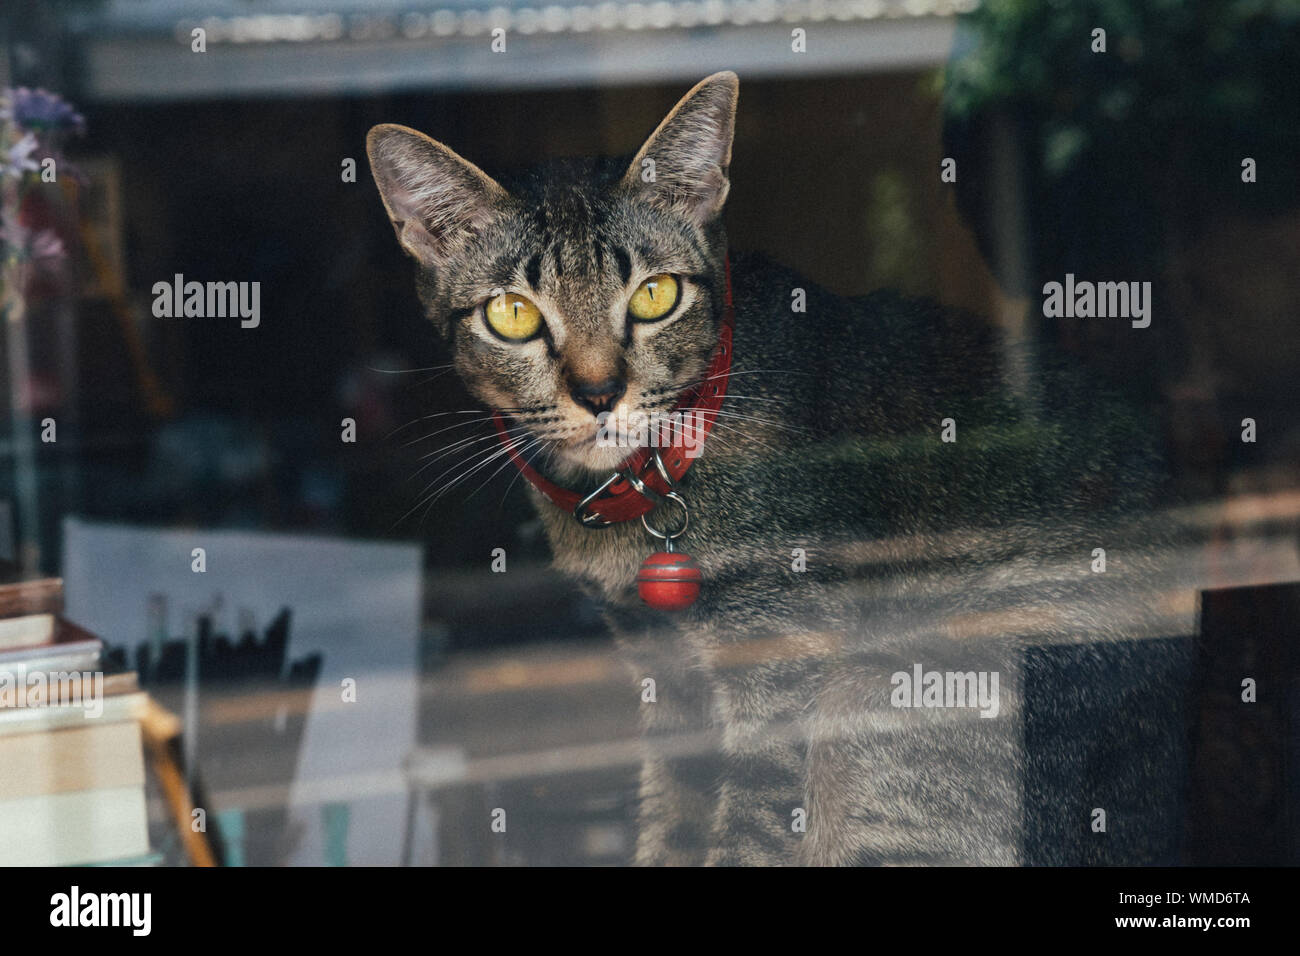 A young tabby cat lying on a window sill and watching out of black window frame. Stock Photo